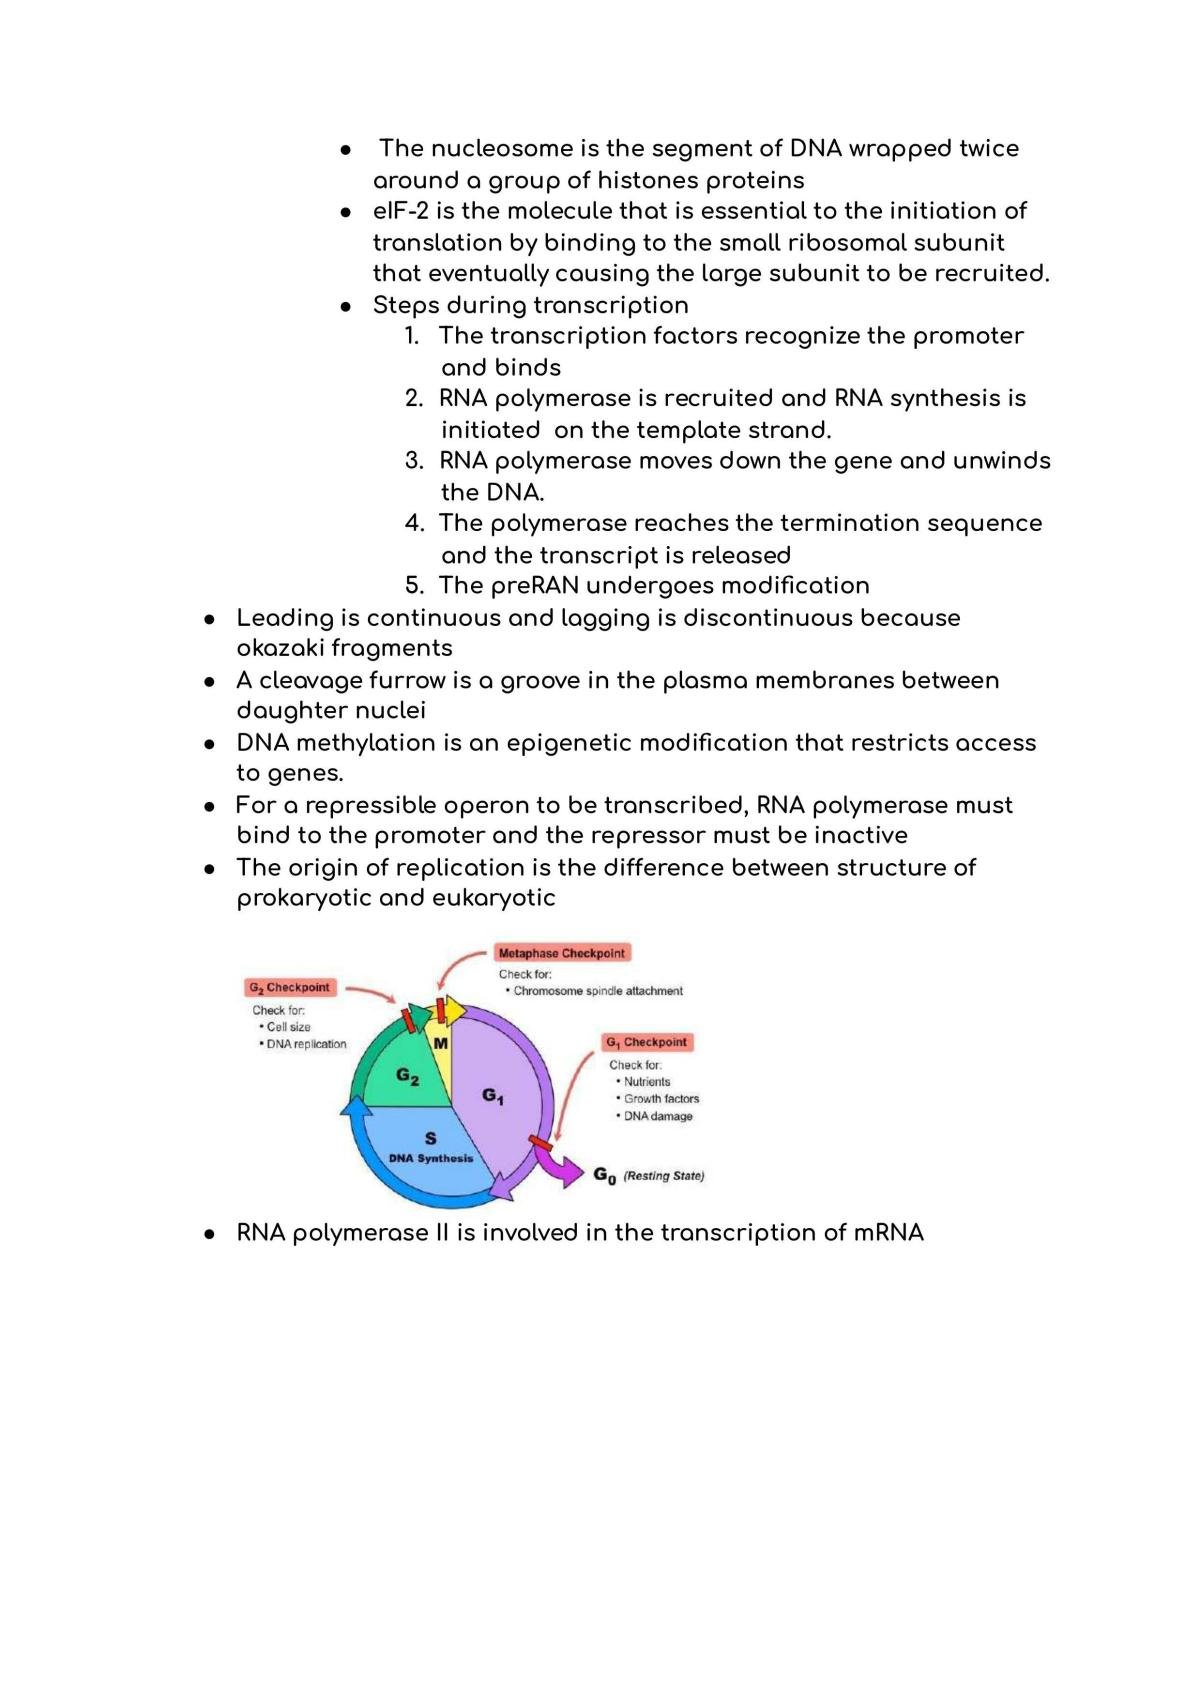 AP Biology - Final Exam Notes - Page 15